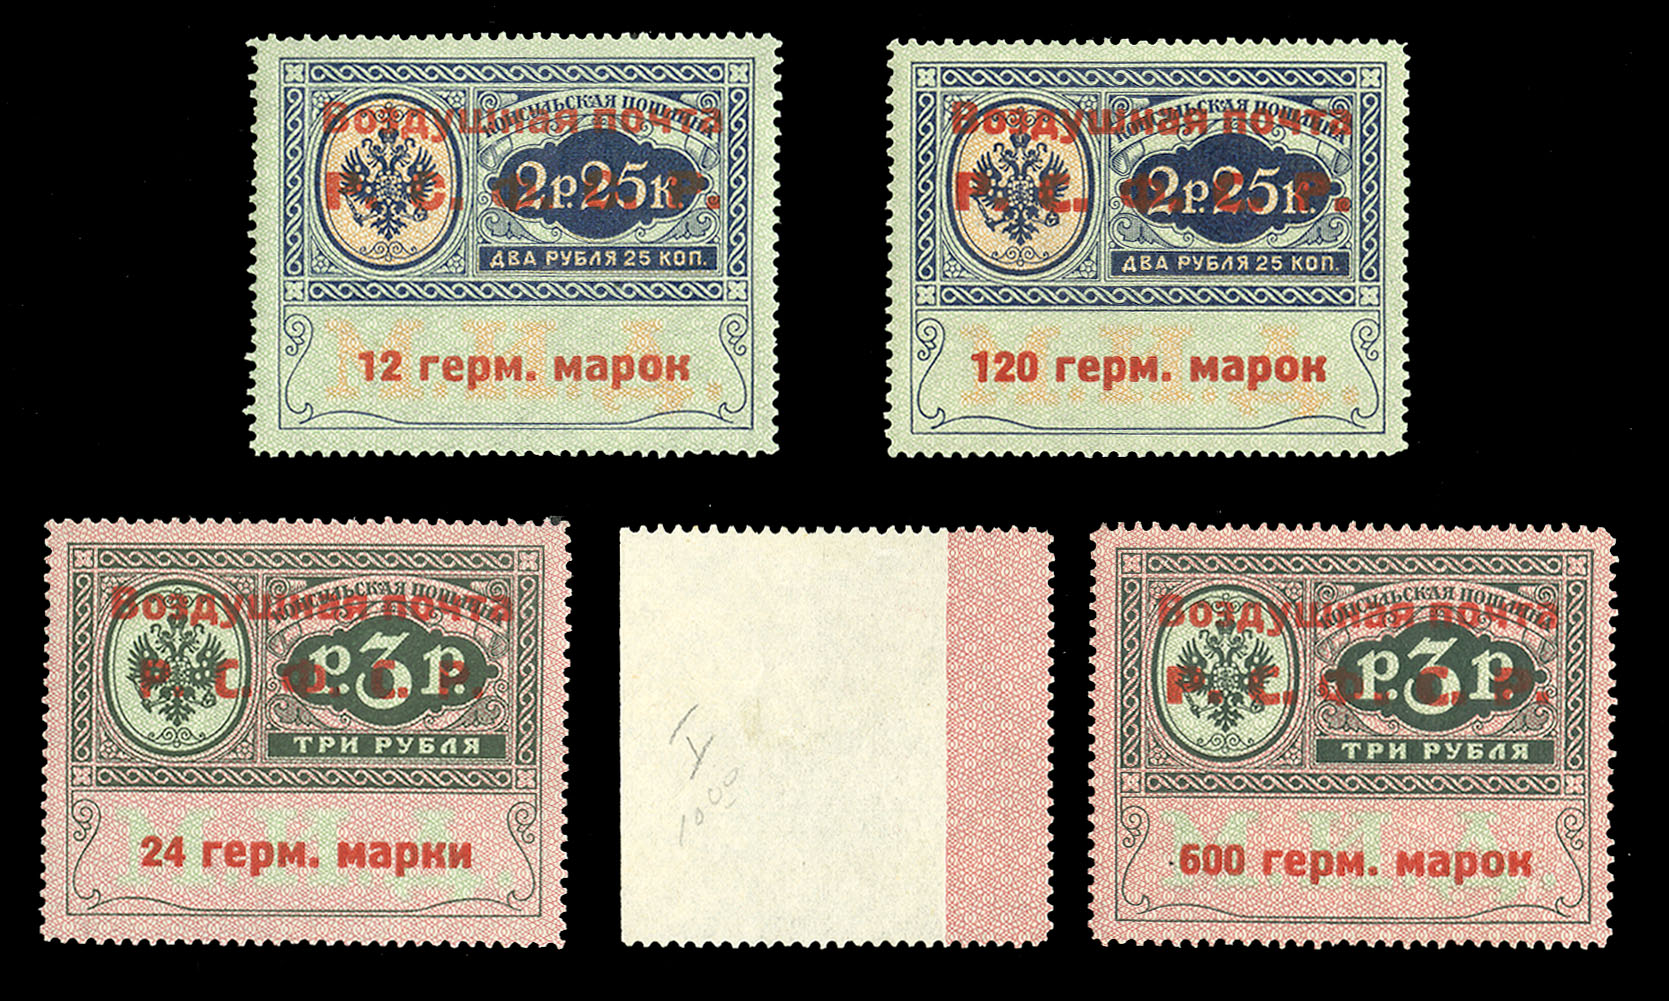 Lot 1243 - RUSSIA Russian Offices in China  -  Cherrystone Auctions U.S. & Worldwide Stamps & Postal History